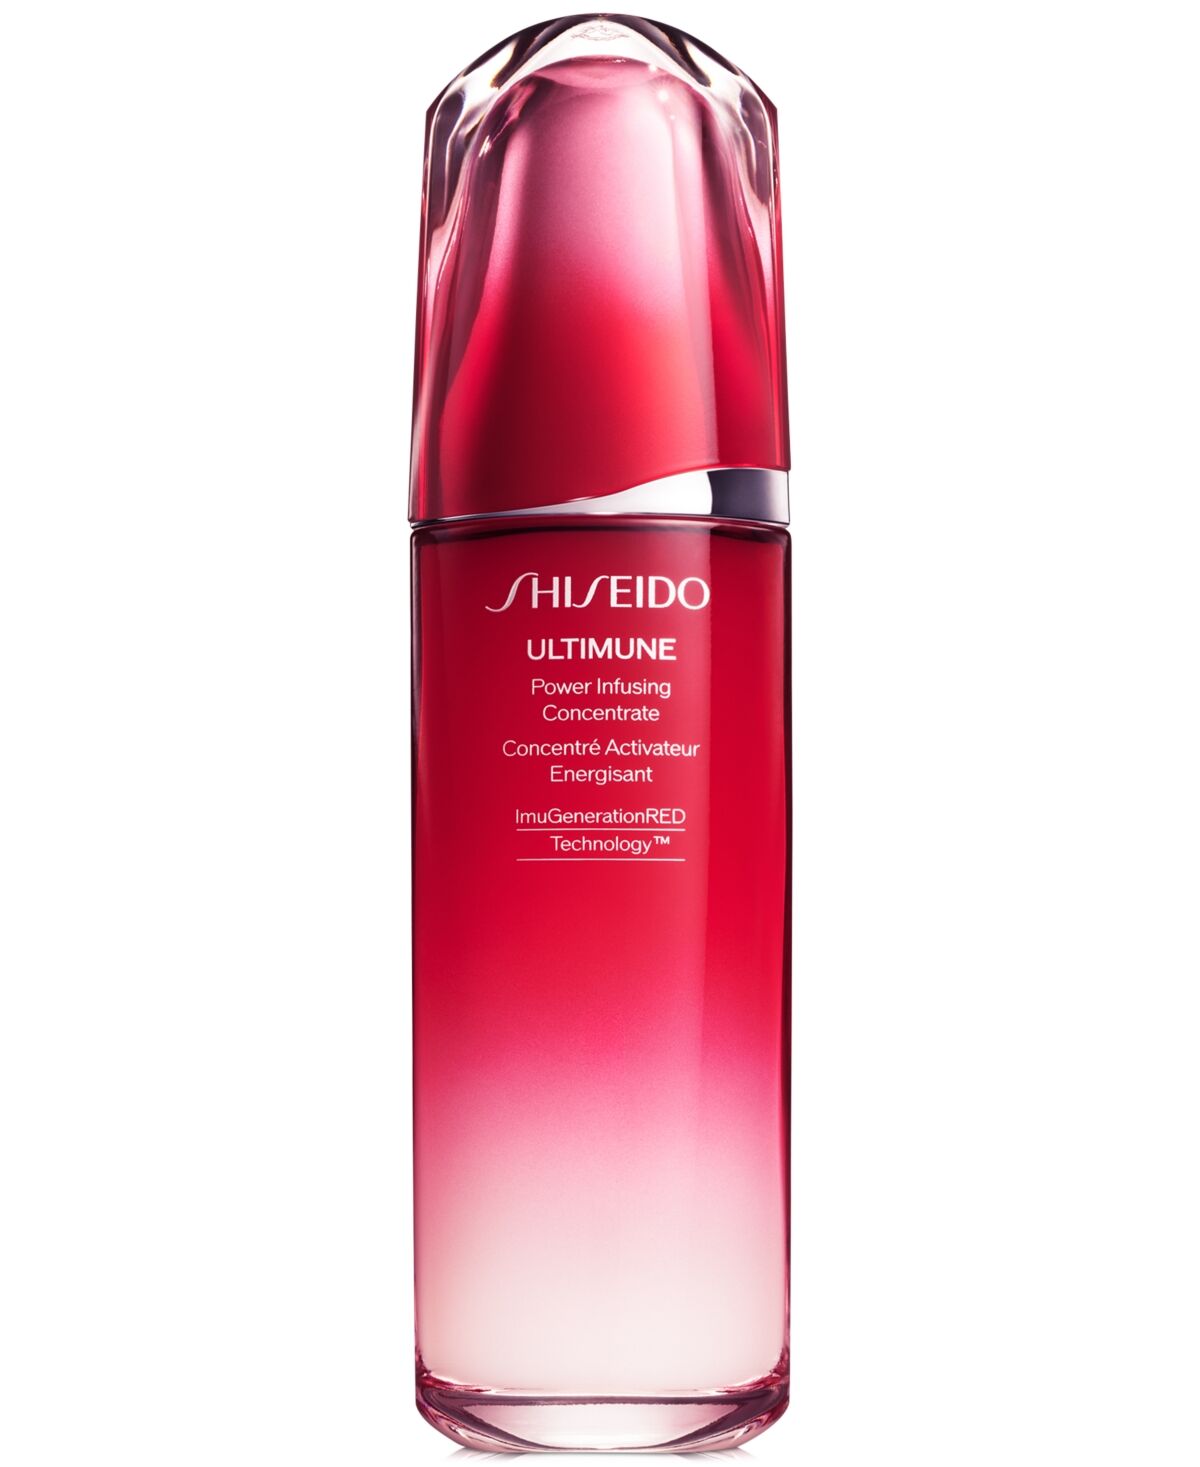 Shiseido Ultimune Power Infusing Anti-Aging Concentrate Jumbo, 4 oz., First At Macy's